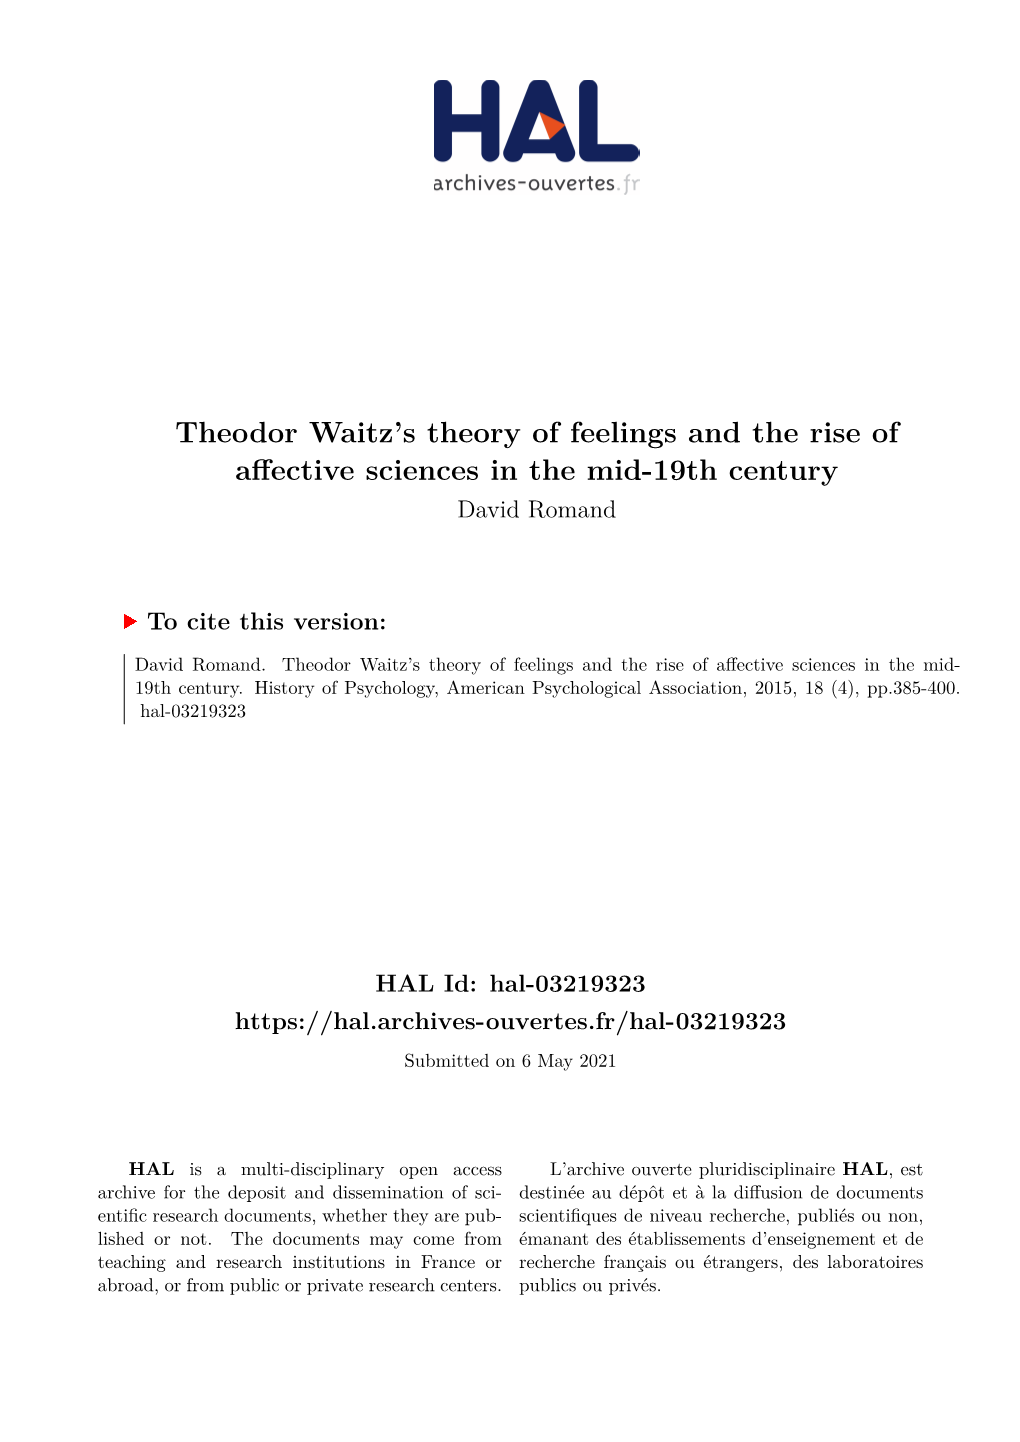 Theodor Waitz's Theory of Feelings and the Rise of Affective Sciences in The